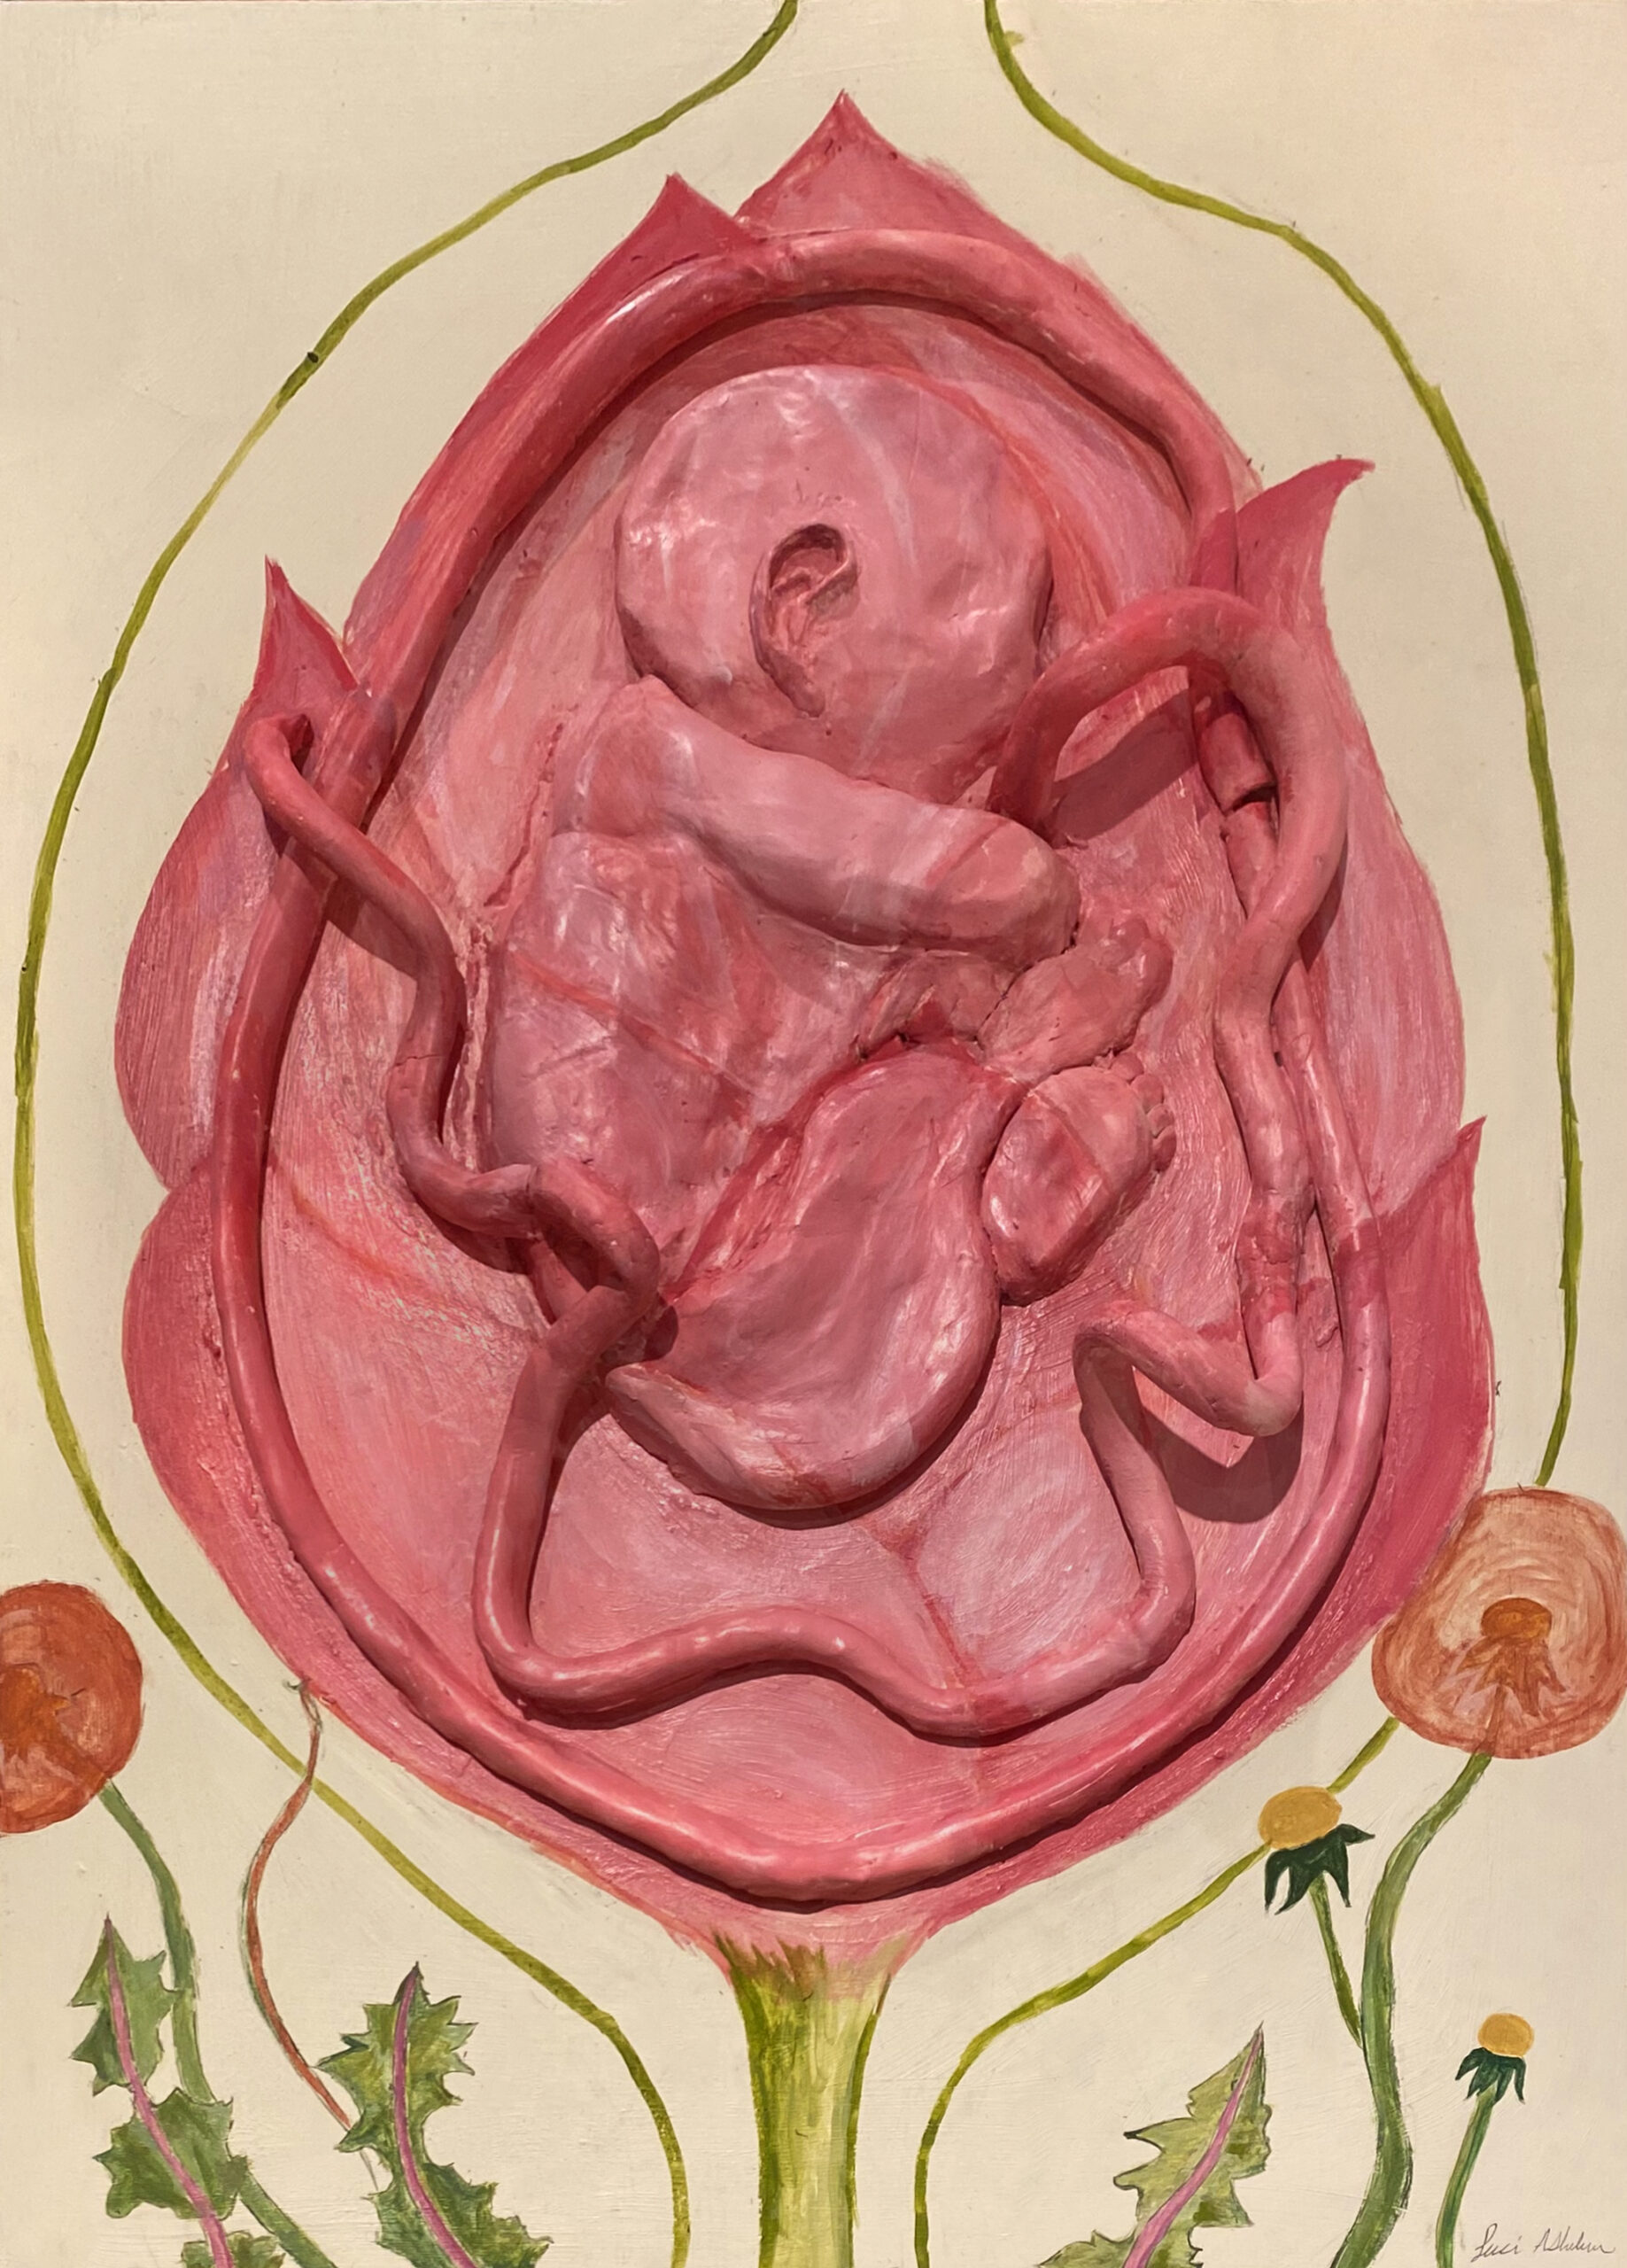 Clay form on wood panel, painted pink and in the shape of a rose.